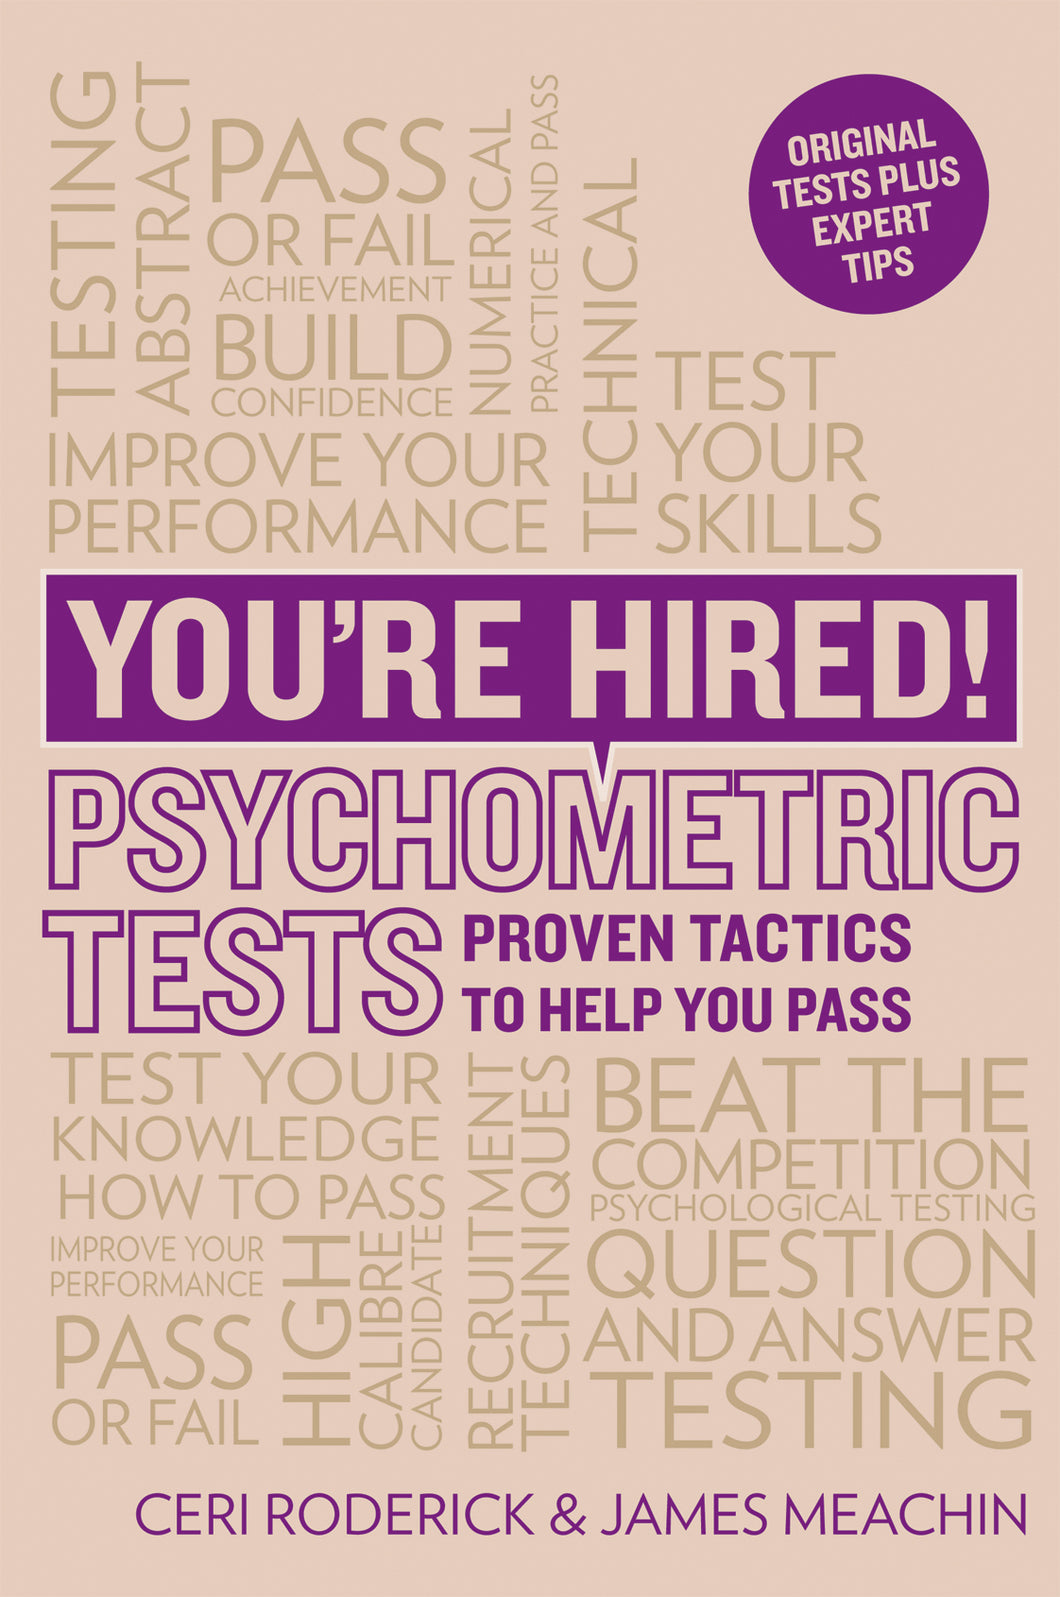 You're Hired: Psychometric Tests